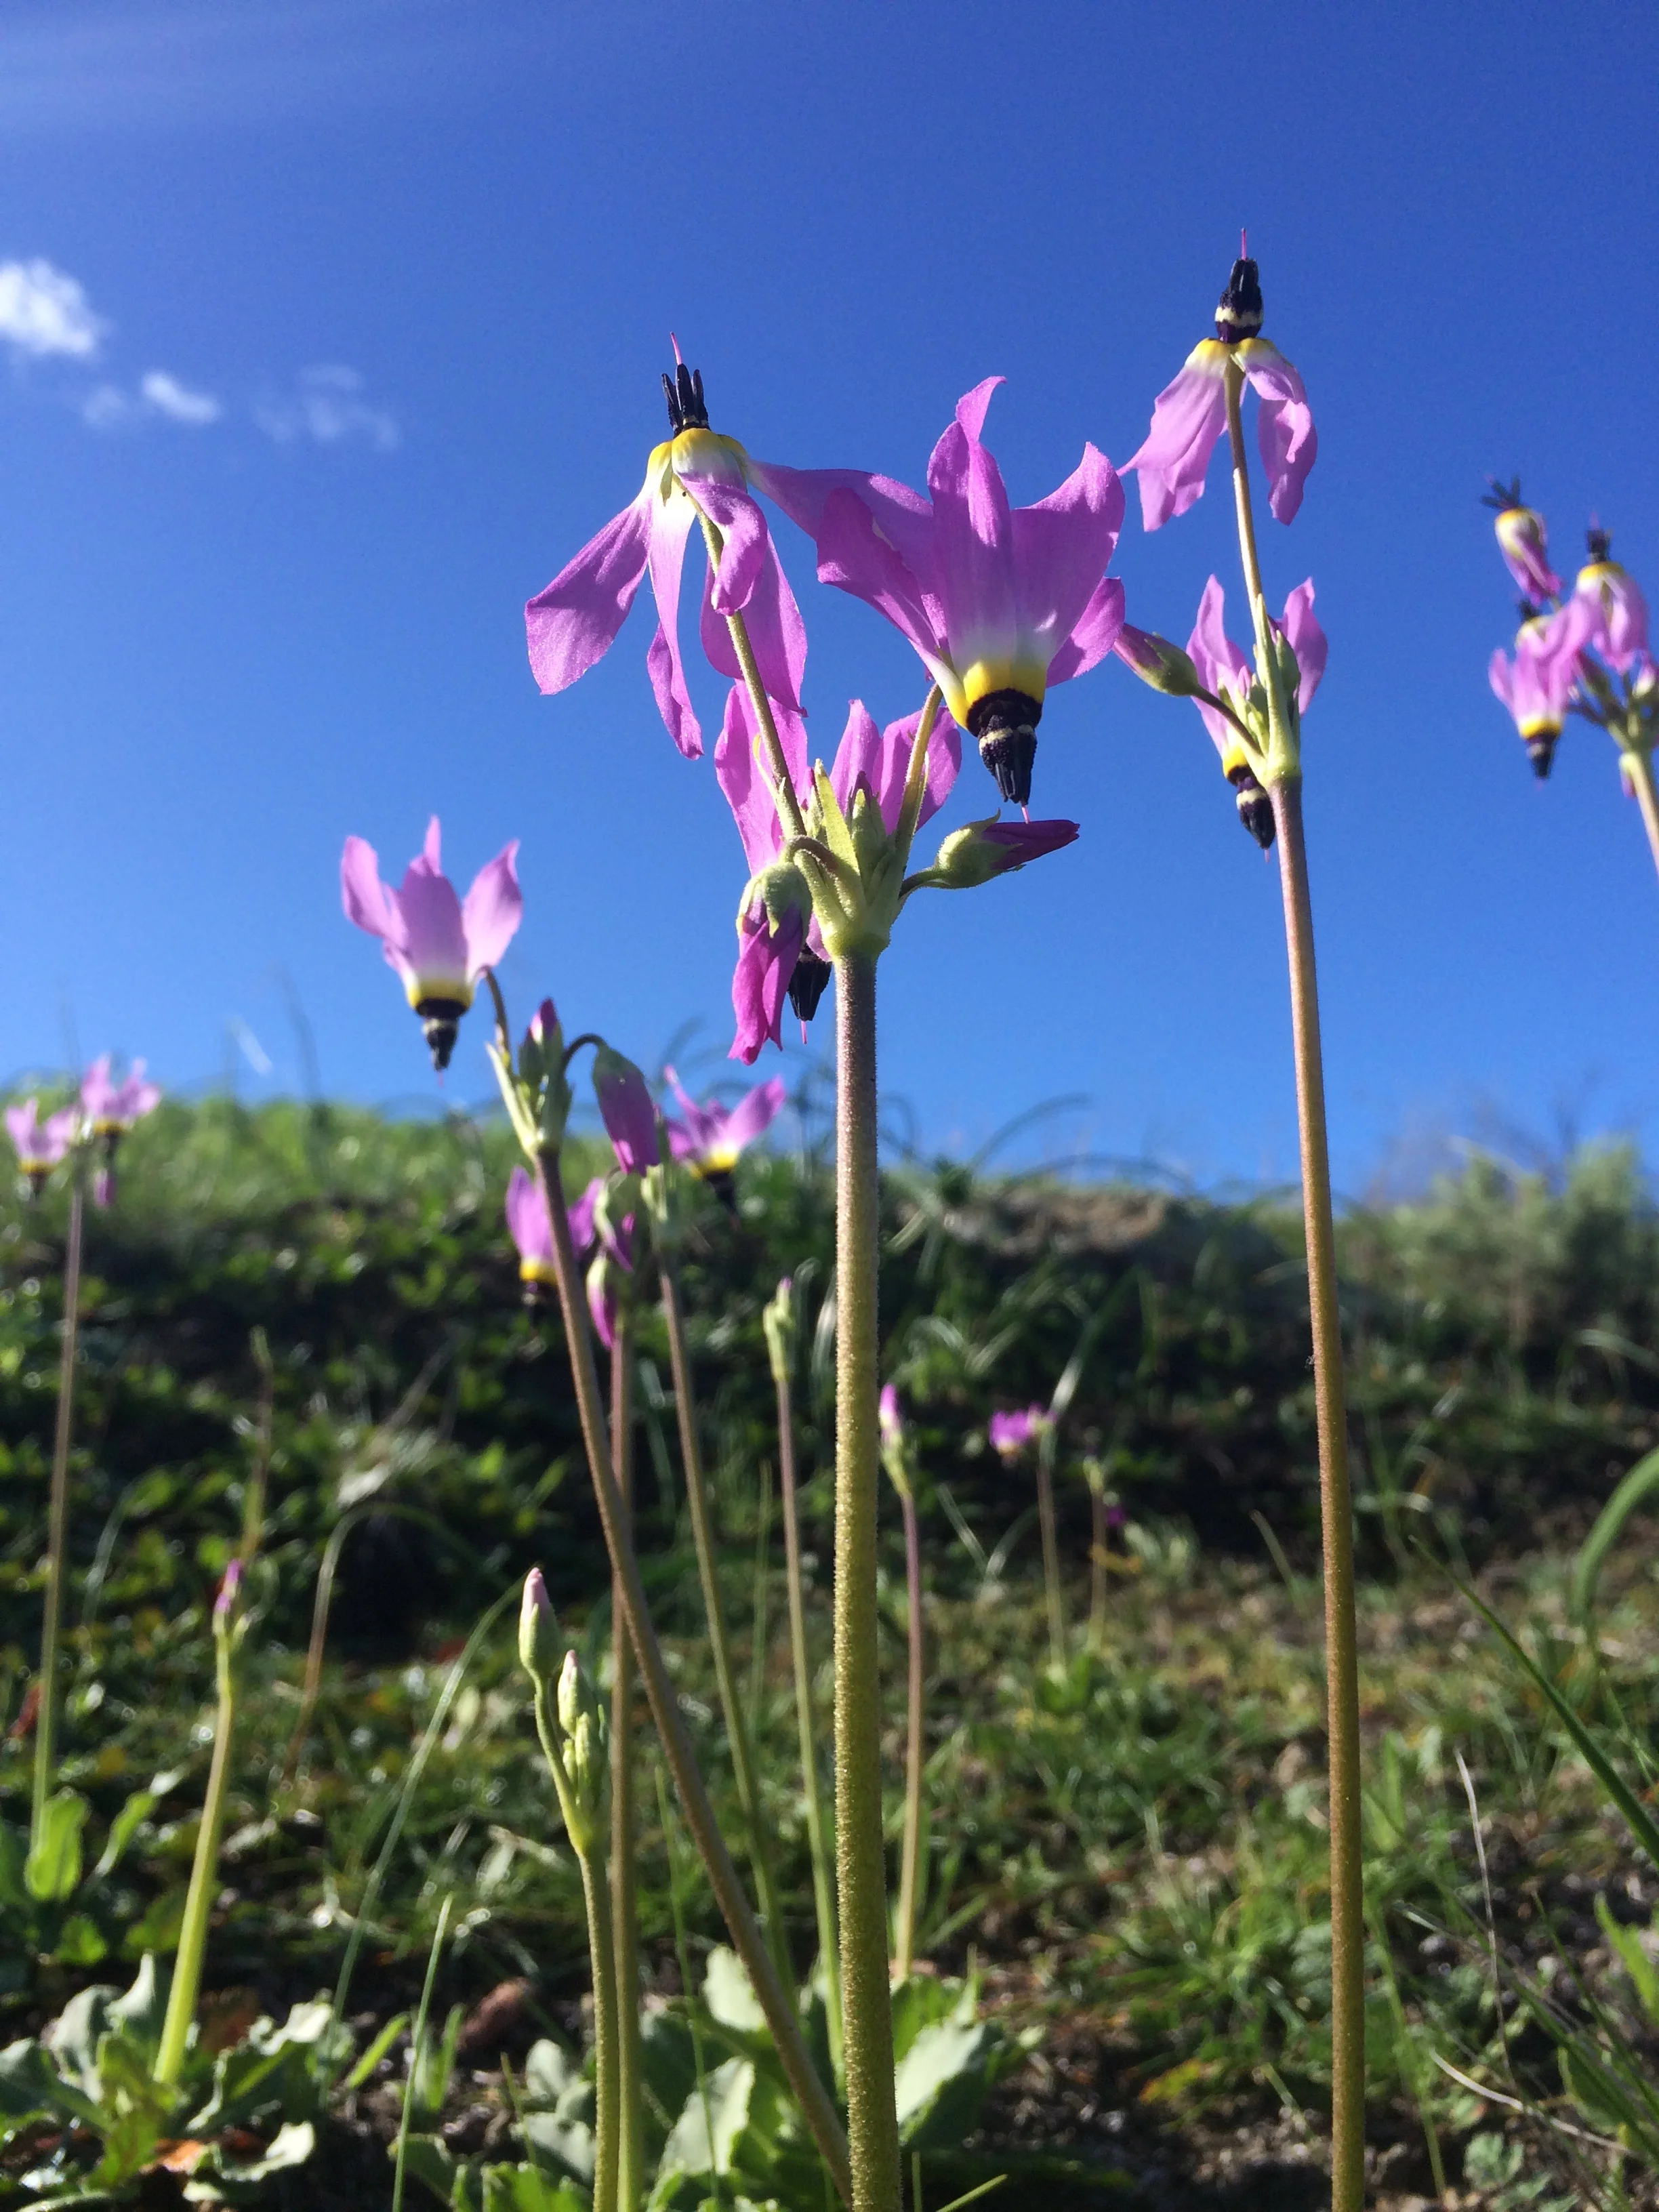 Native shooting stars, or Dodecatheon clevelandii, also tend to bloom more after a fire and good rain. (Justin Valliere/UC Davis)